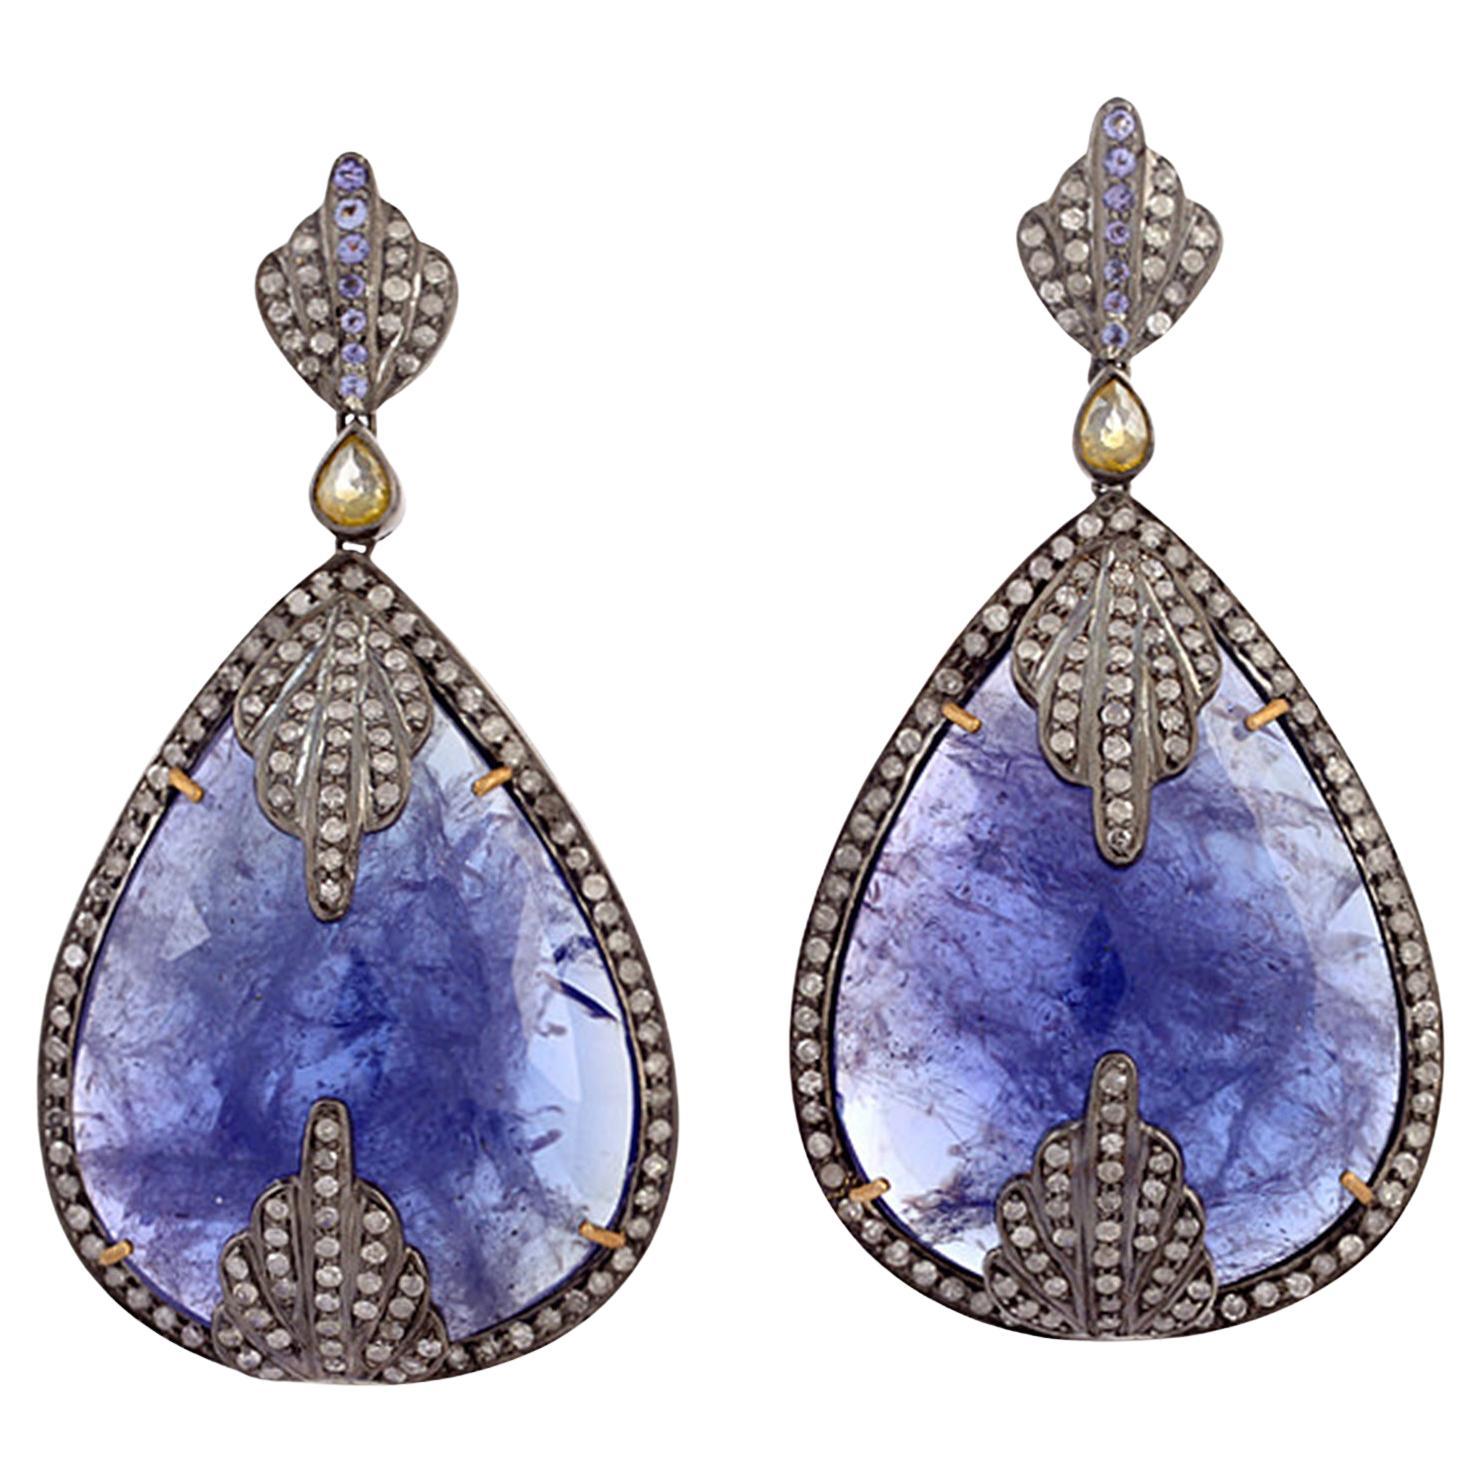 130.73ct Pear Shaped Tanzanite Dangle Earrings With Diamonds In 18k Yellow Gold For Sale